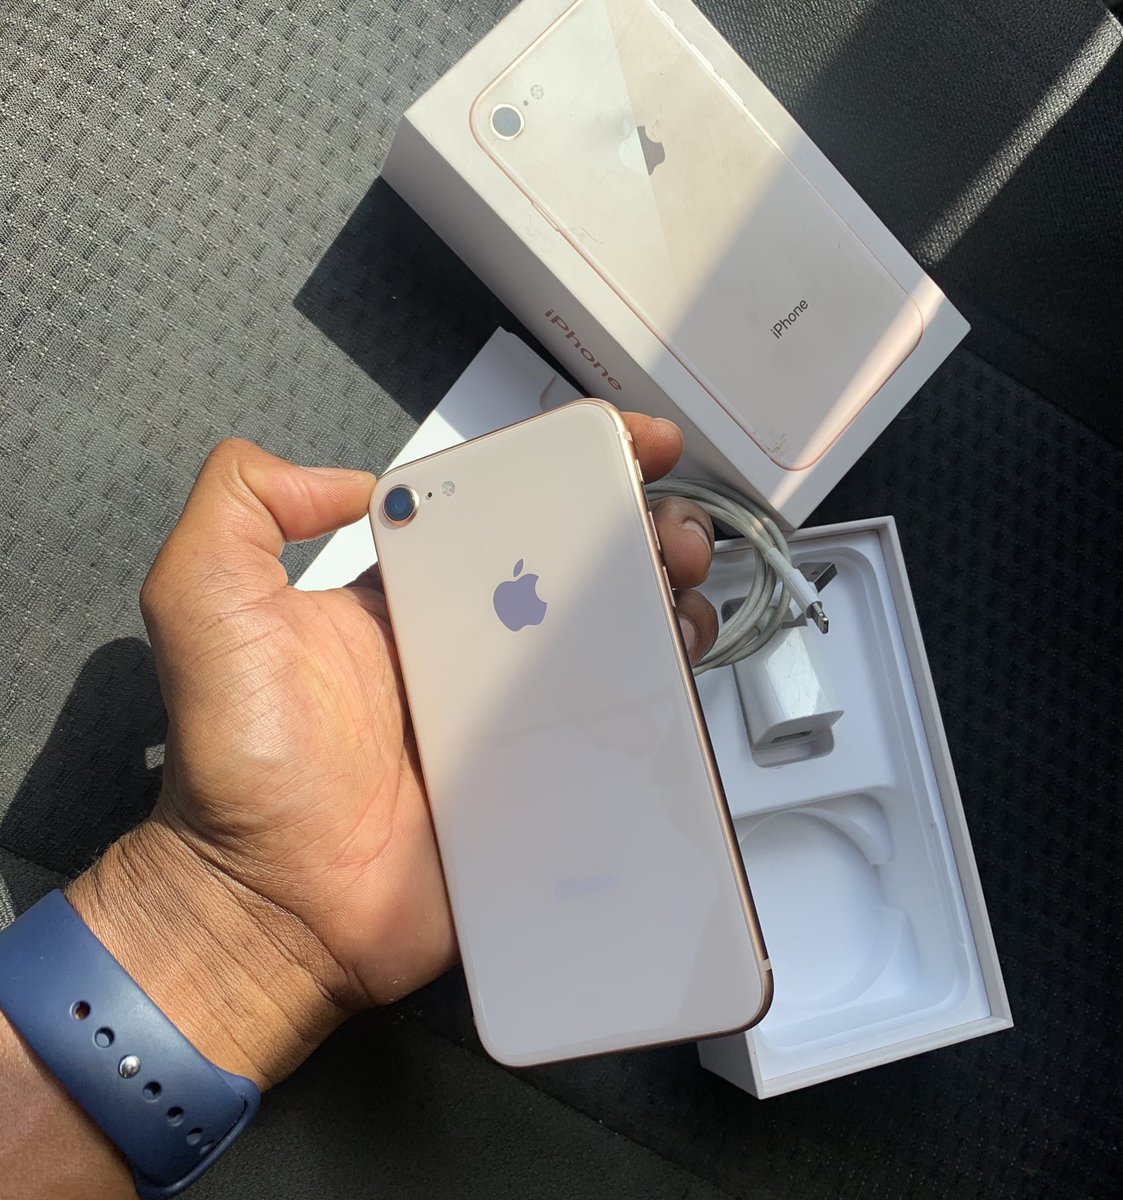  @iTech911 Used Factory Unlocked iPhone8, Gold 64GB. Battery Health >> 84%>> Ghc 1,599Call / WhatsApp / iMessage 0262666226 #iTech911  #iBuy  #iSell  #iSwap  #iFix  #Apple  #Accra   #Warranty  #iDealerShip   #TechAddiction